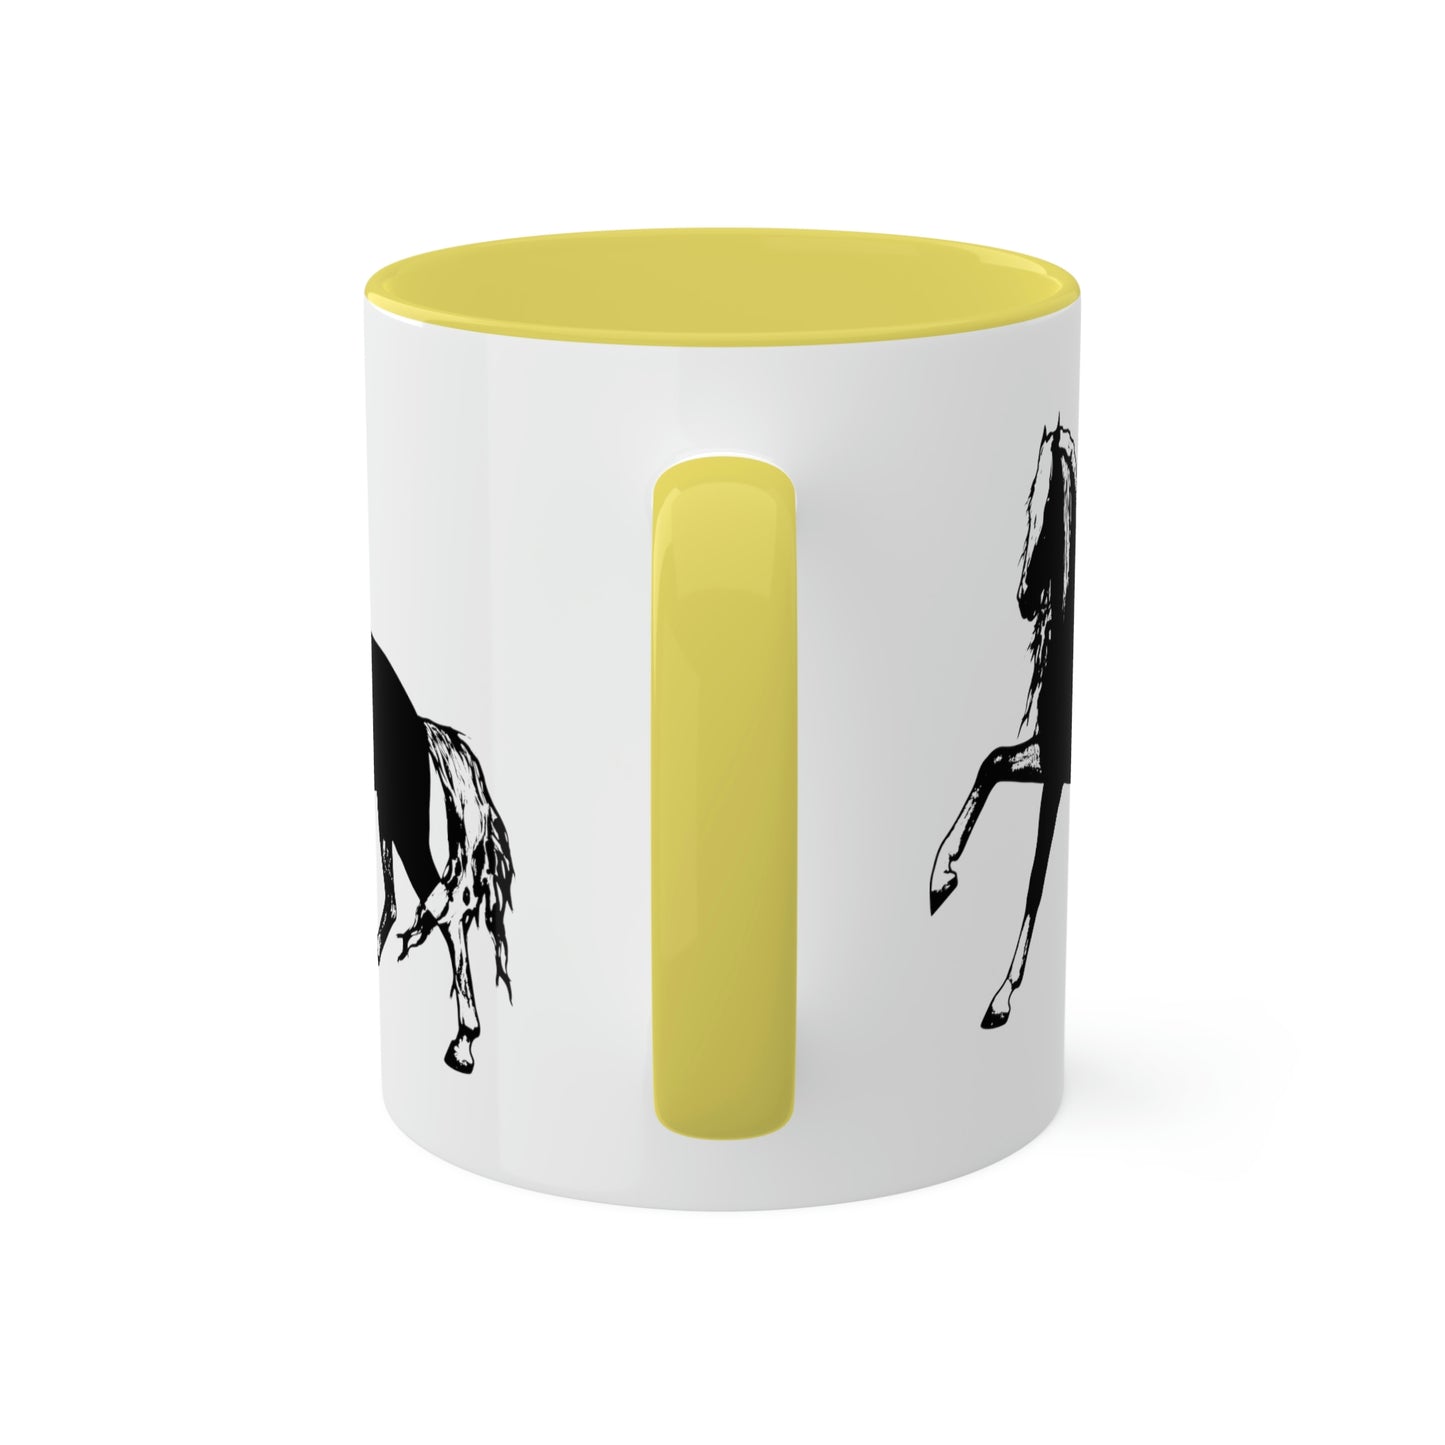 Mug Enjoy Your Morning Coffee with Our Colorful 'I Love My Horse' Mugs - Perfect for Any Horse Lover!